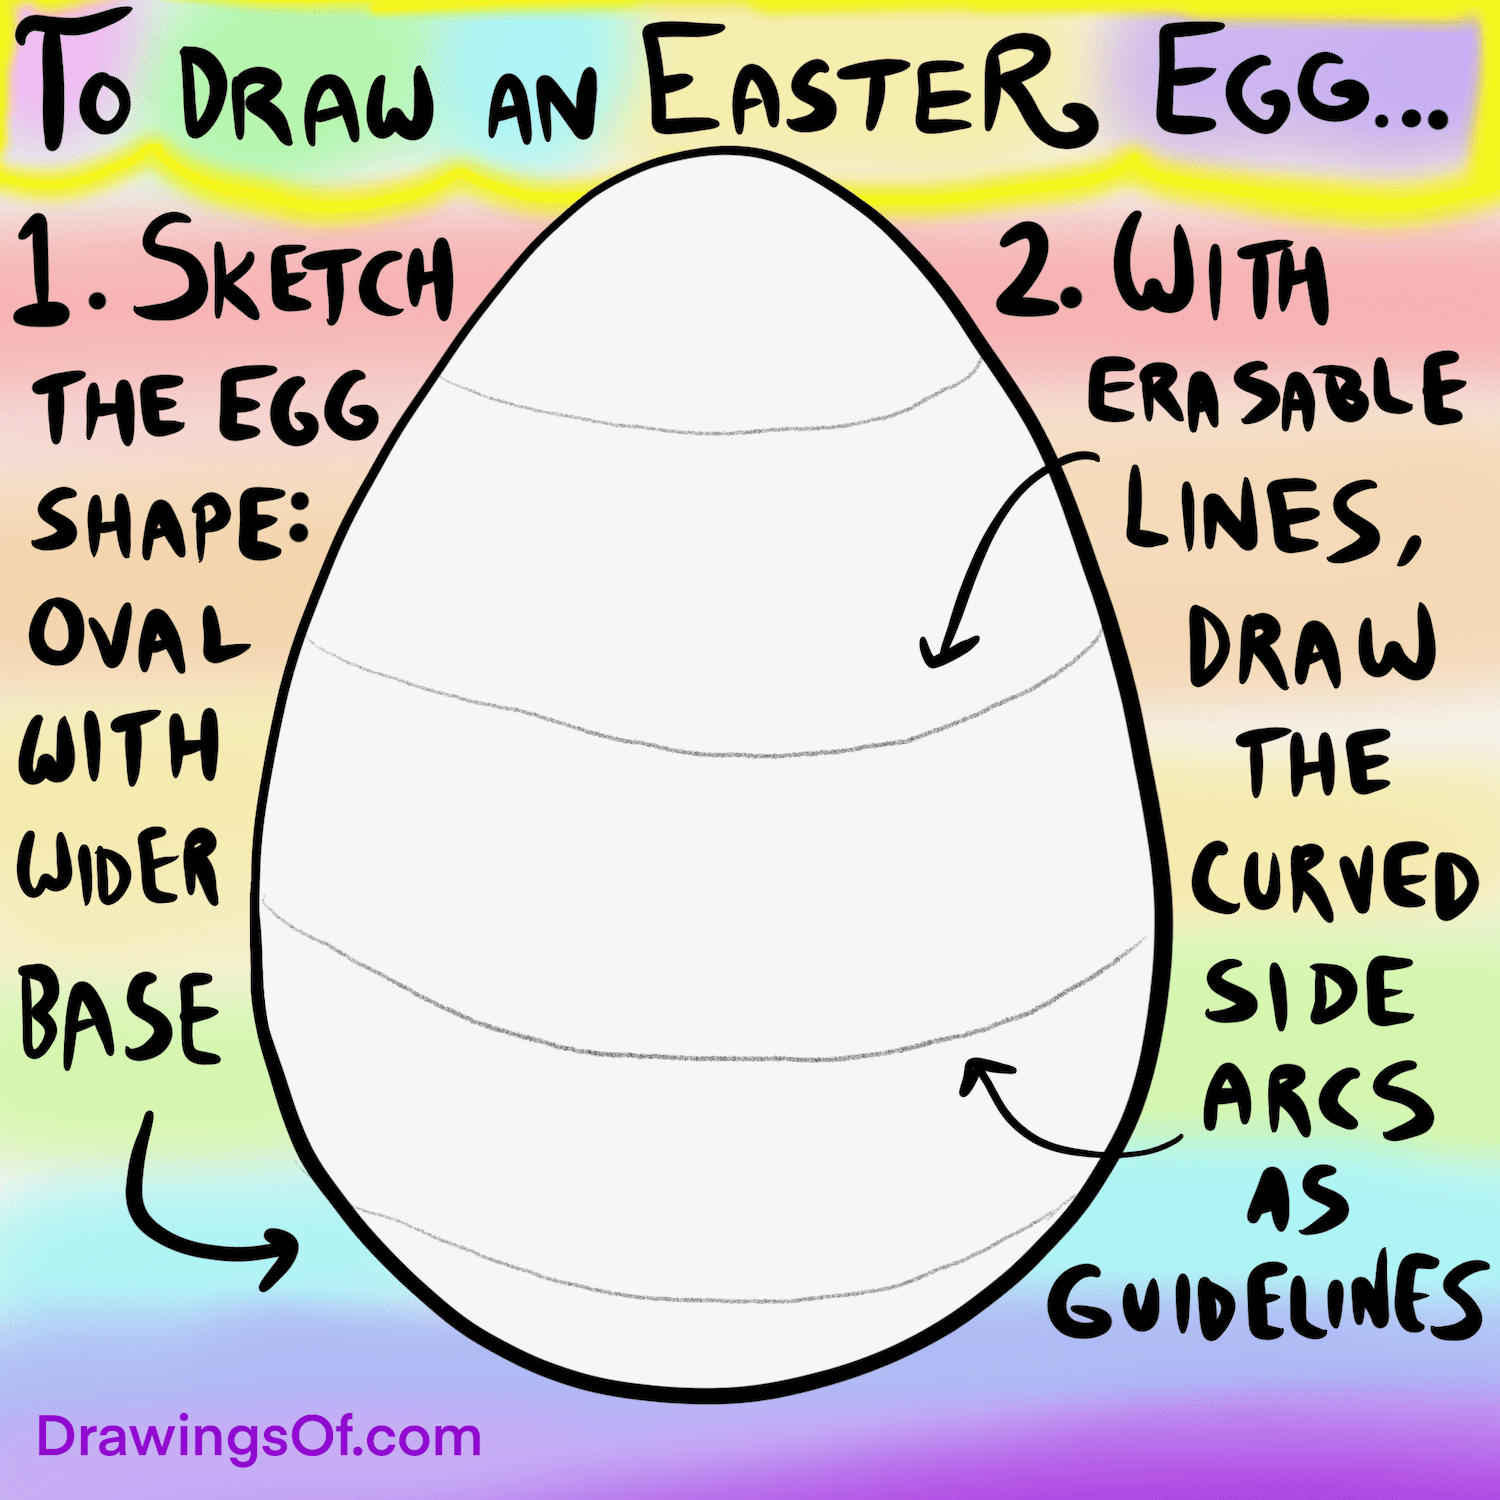 How to draw an Easter egg